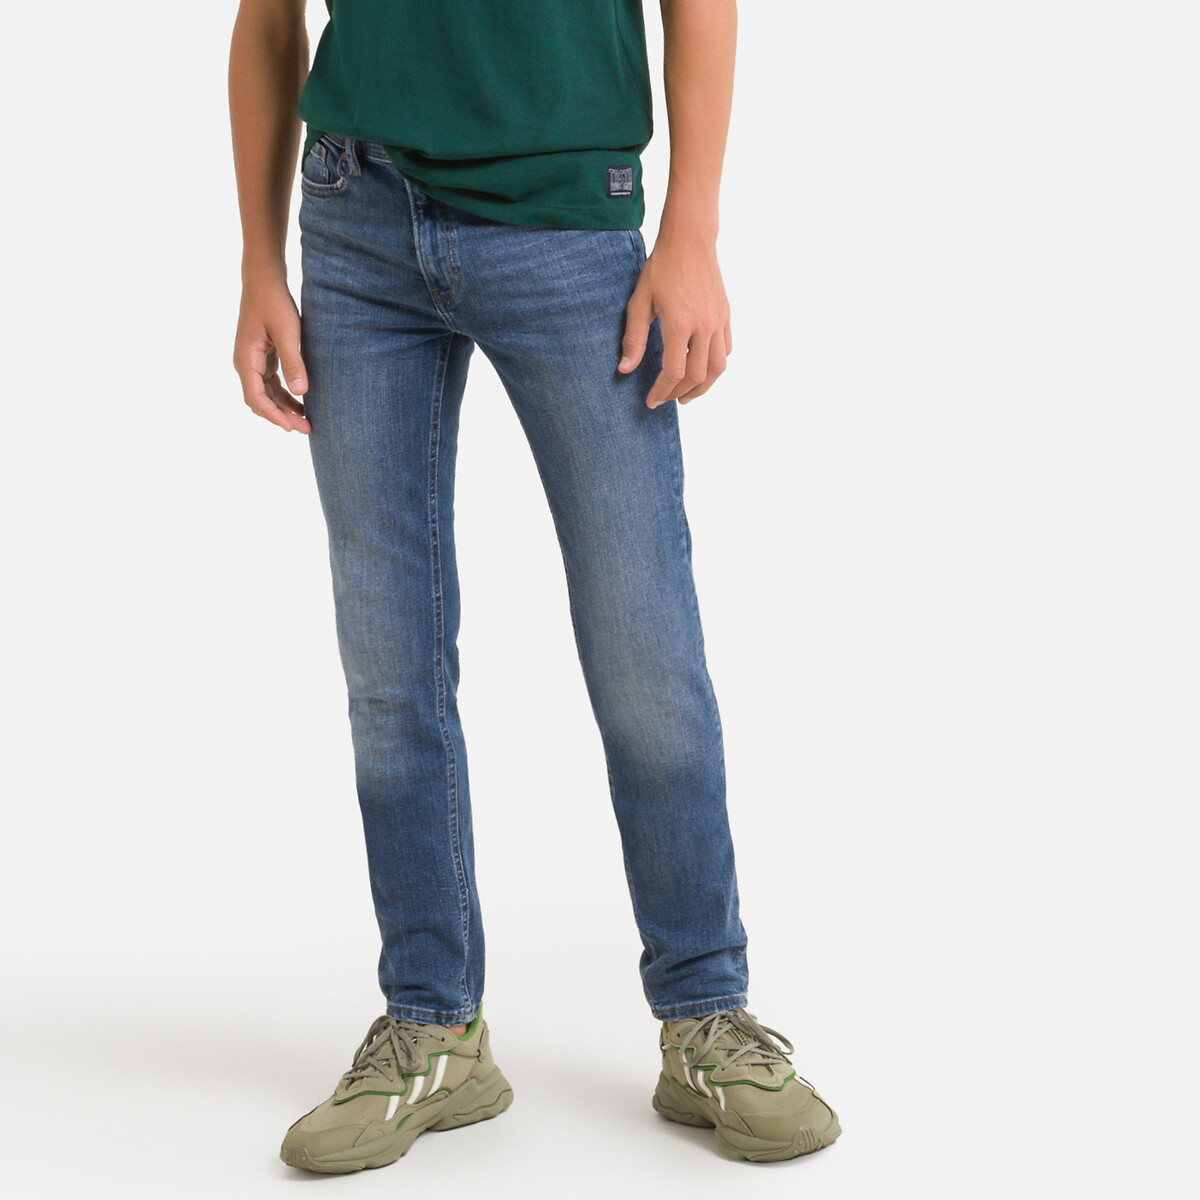 Mid Rise Skinny Jeans, 10-16 Years